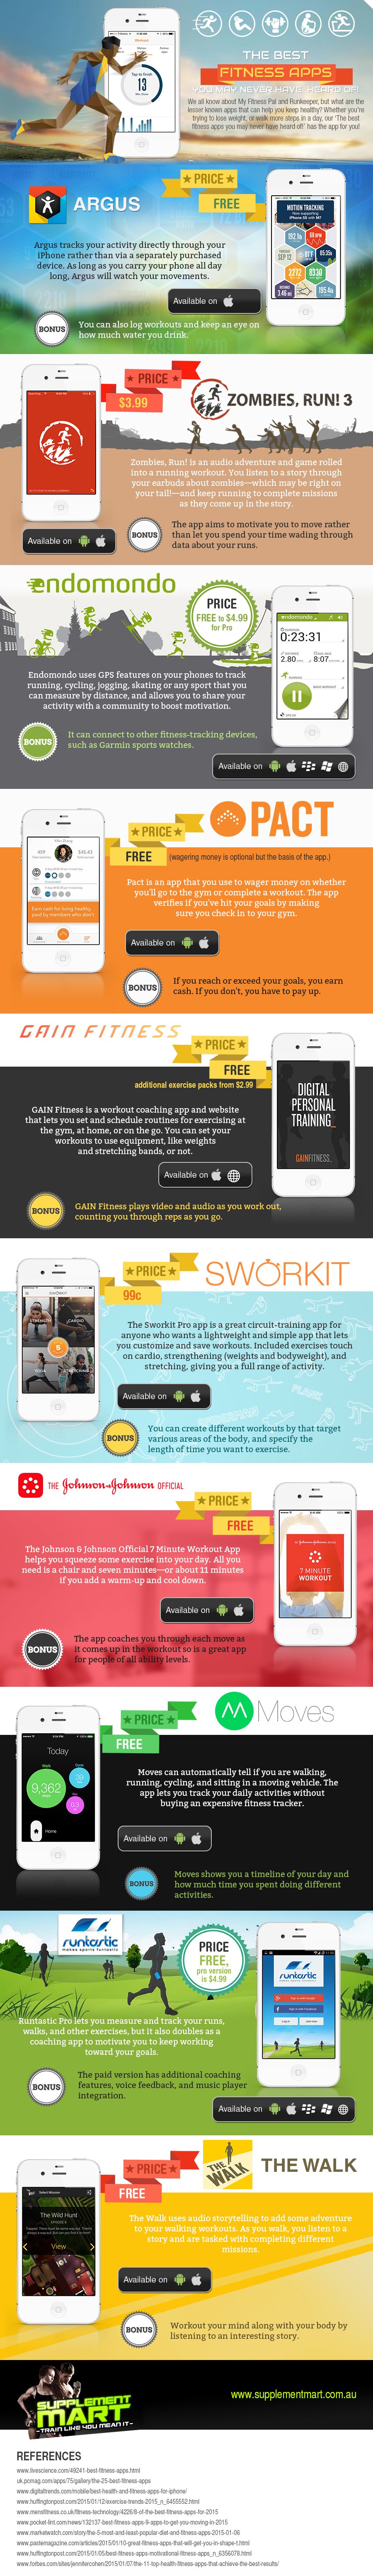 The-Best-Fitness-Apps-Infographic